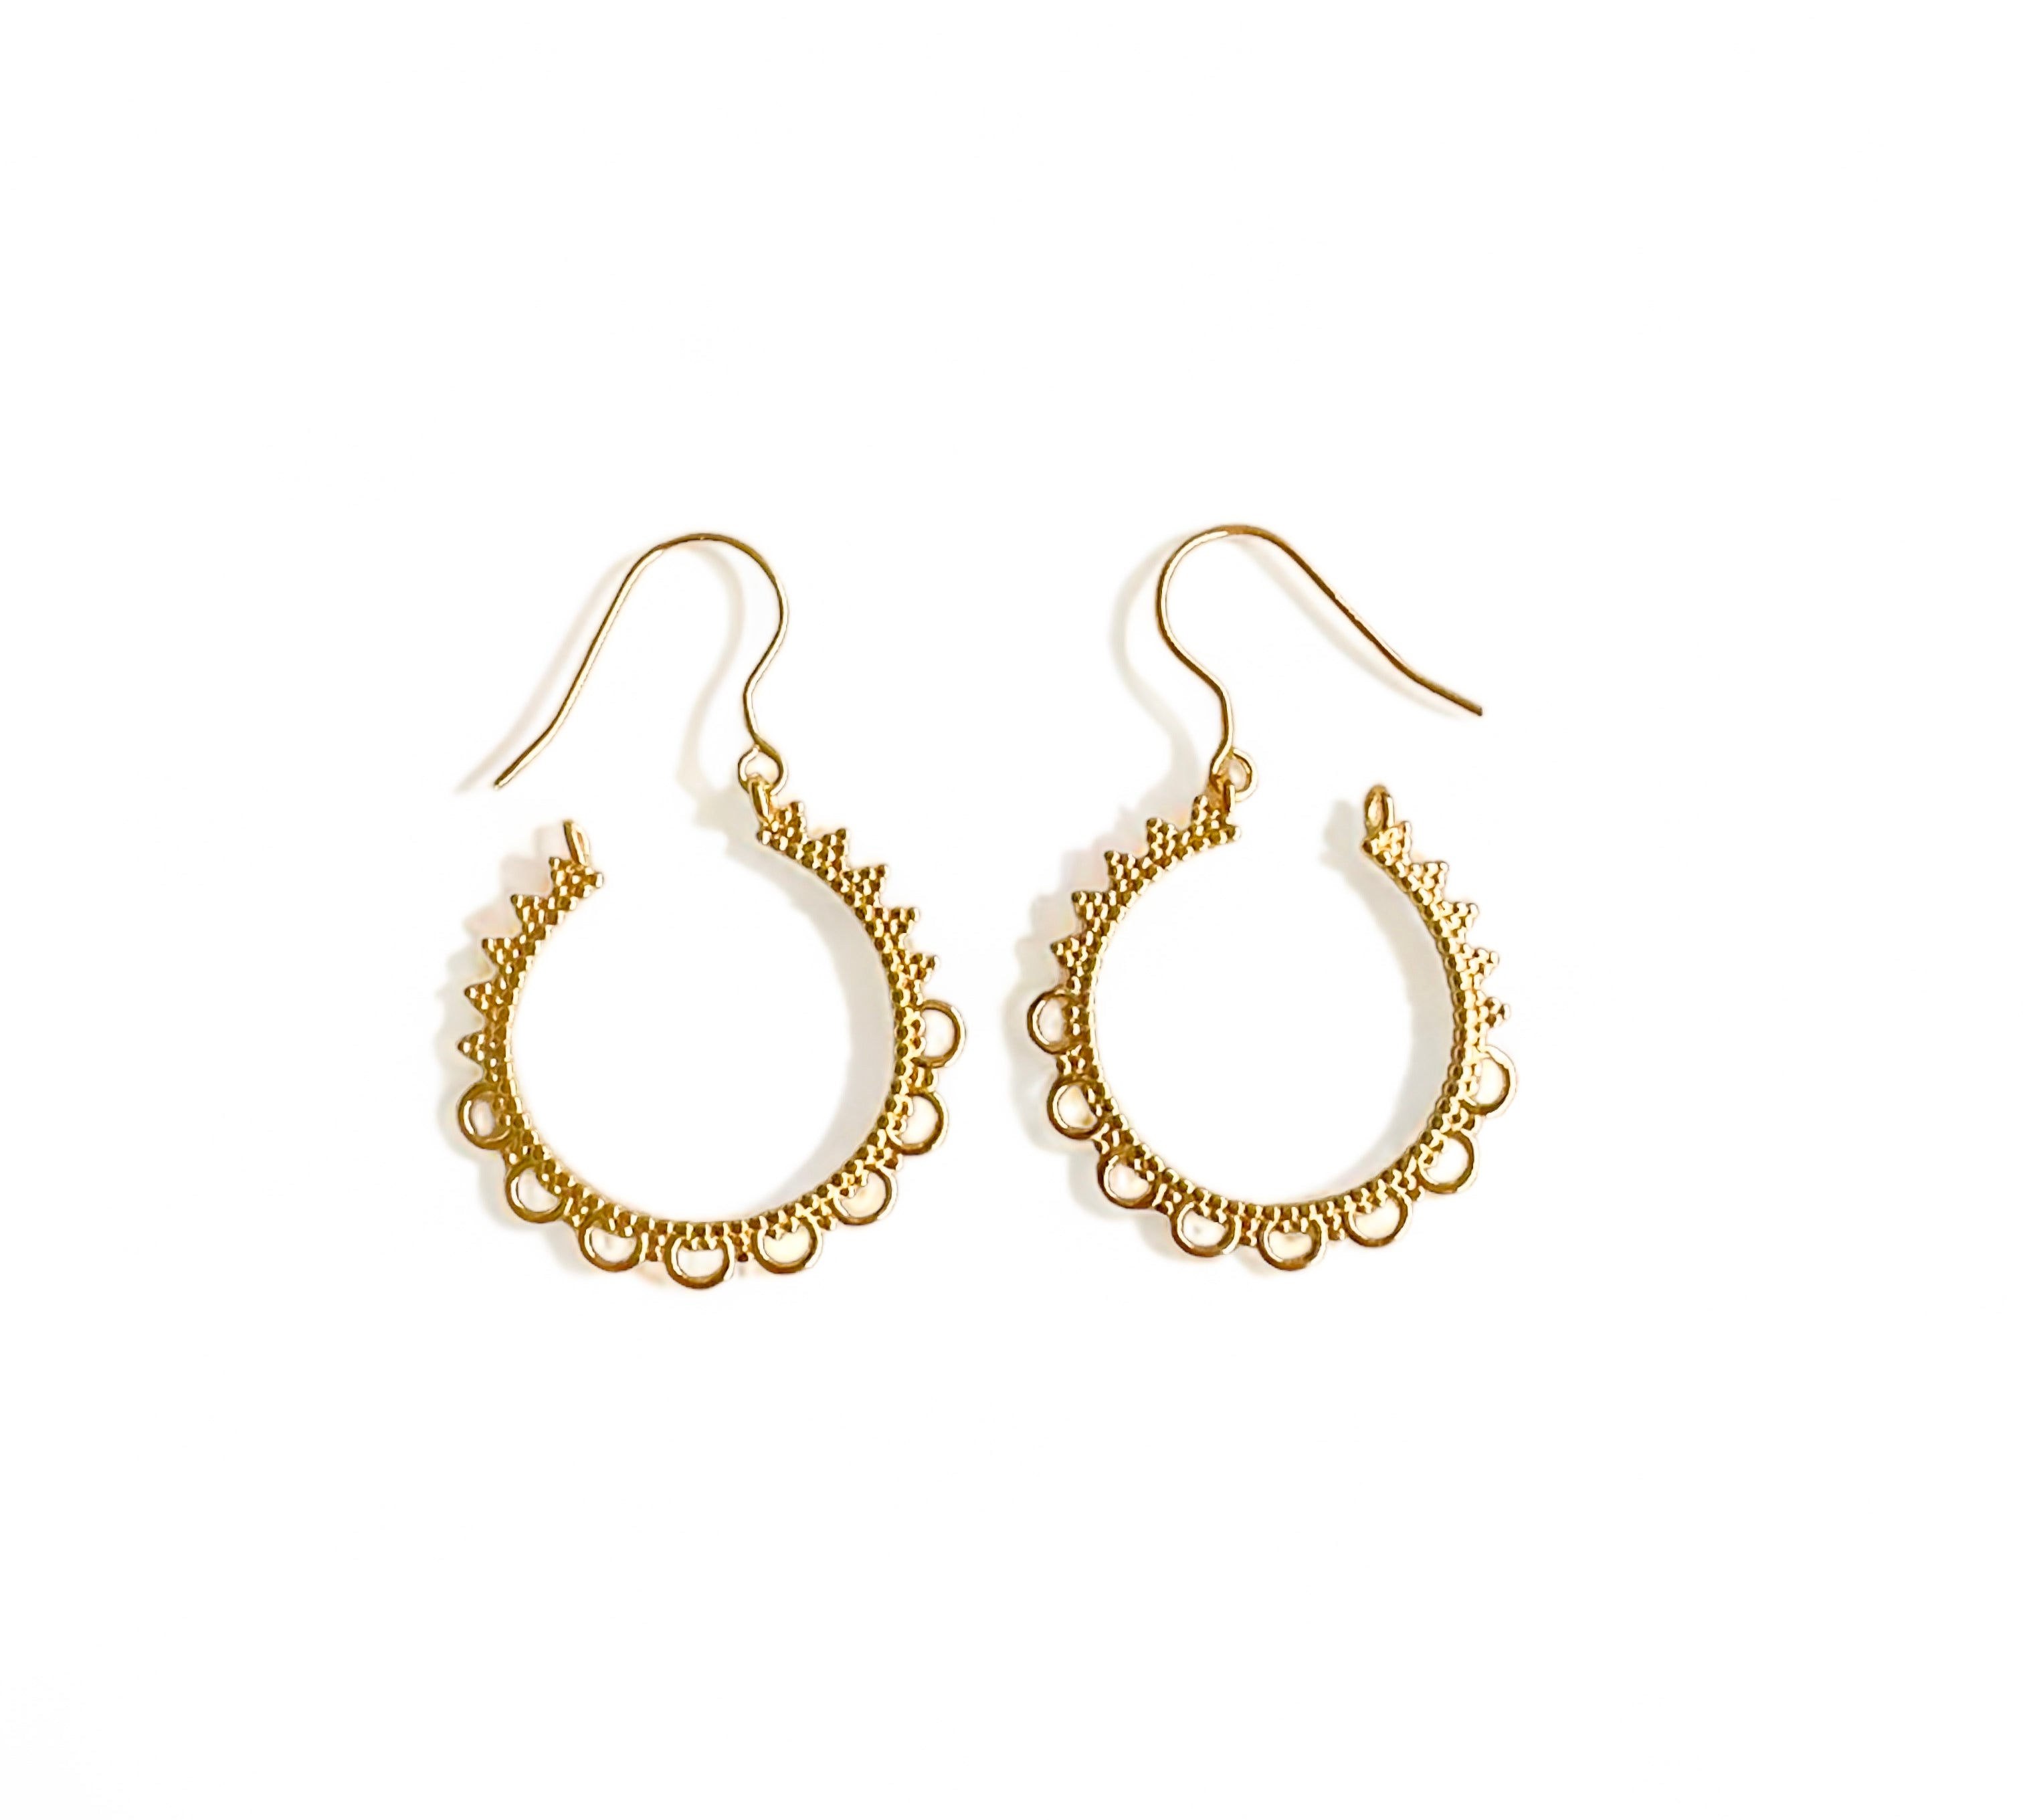 Elegant Lacy Vintage Hoop Earrings by Alessandra James, featuring delicate scalloped edging for a feminine touch.